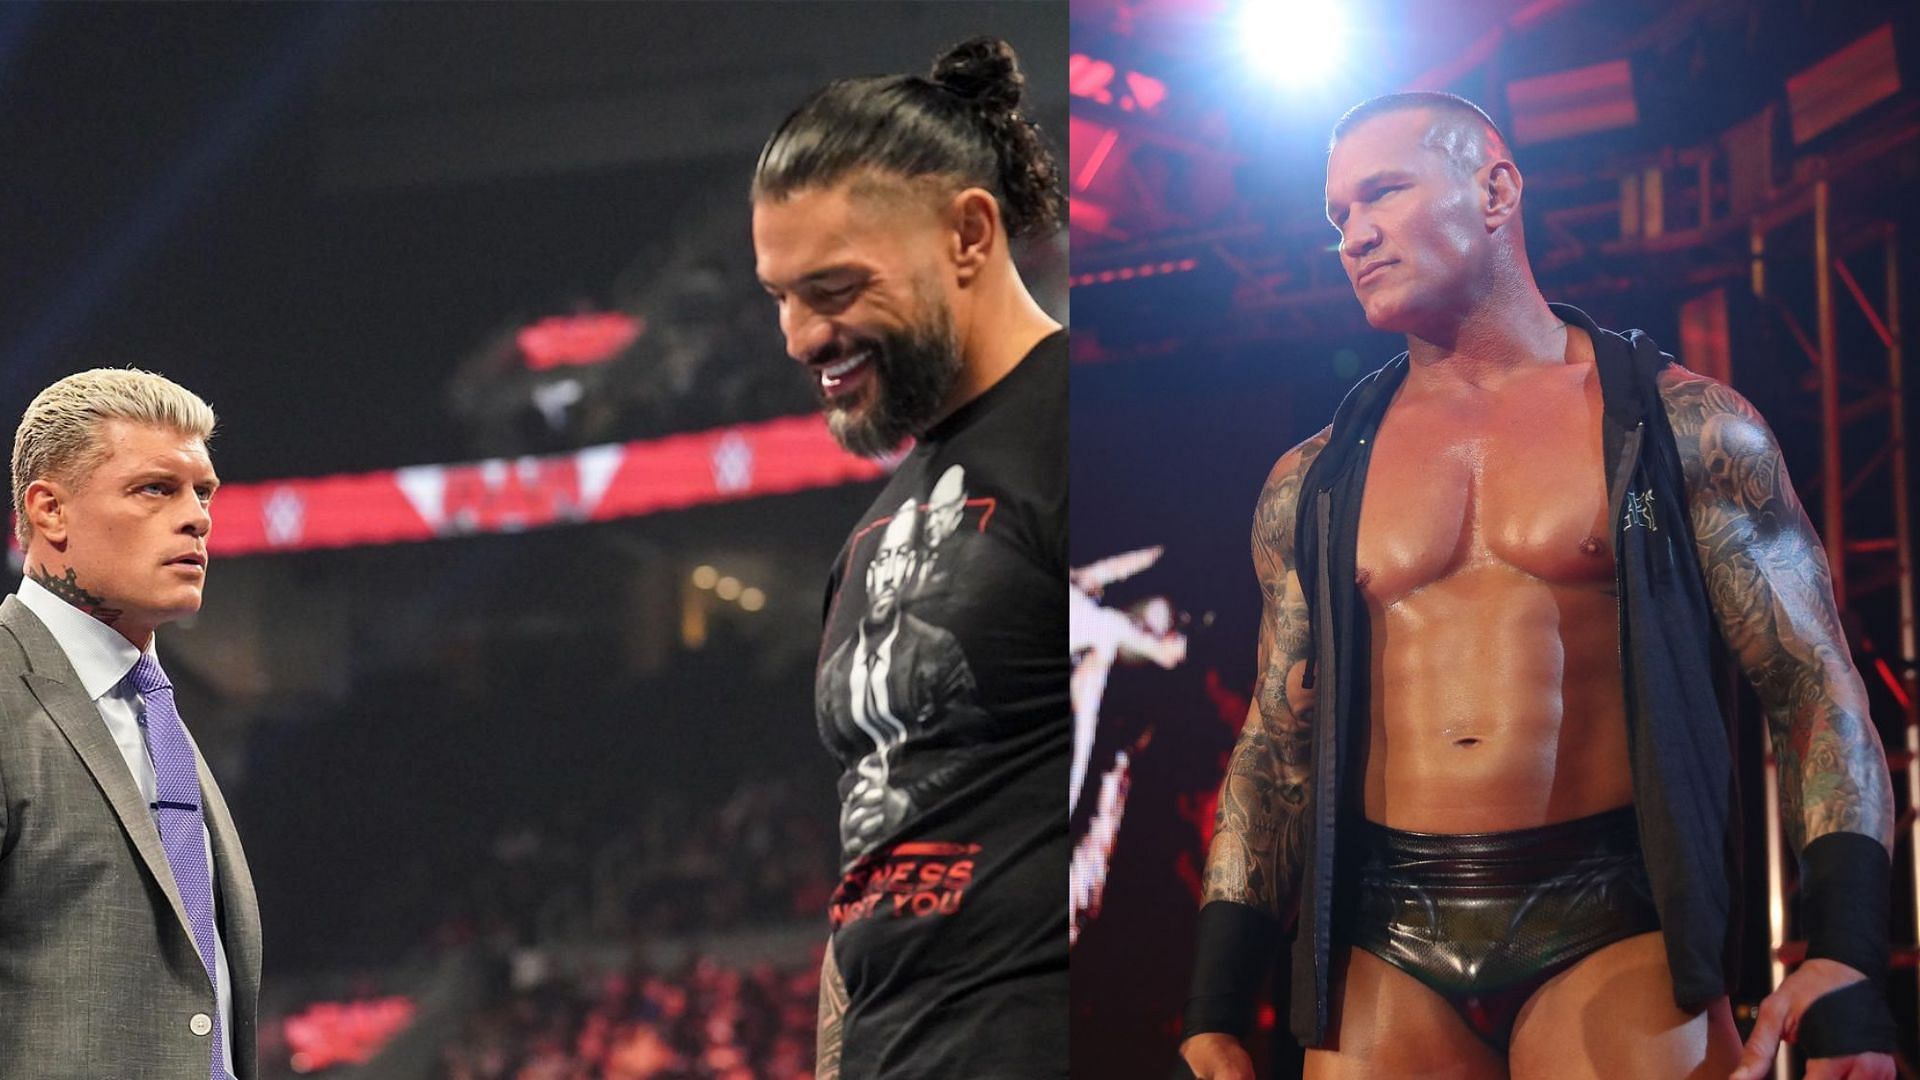 "This is the best idea" - Wrestling world reacts to the idea of Randy Orton interfering between Roman Reigns vs. Cody Rhodes